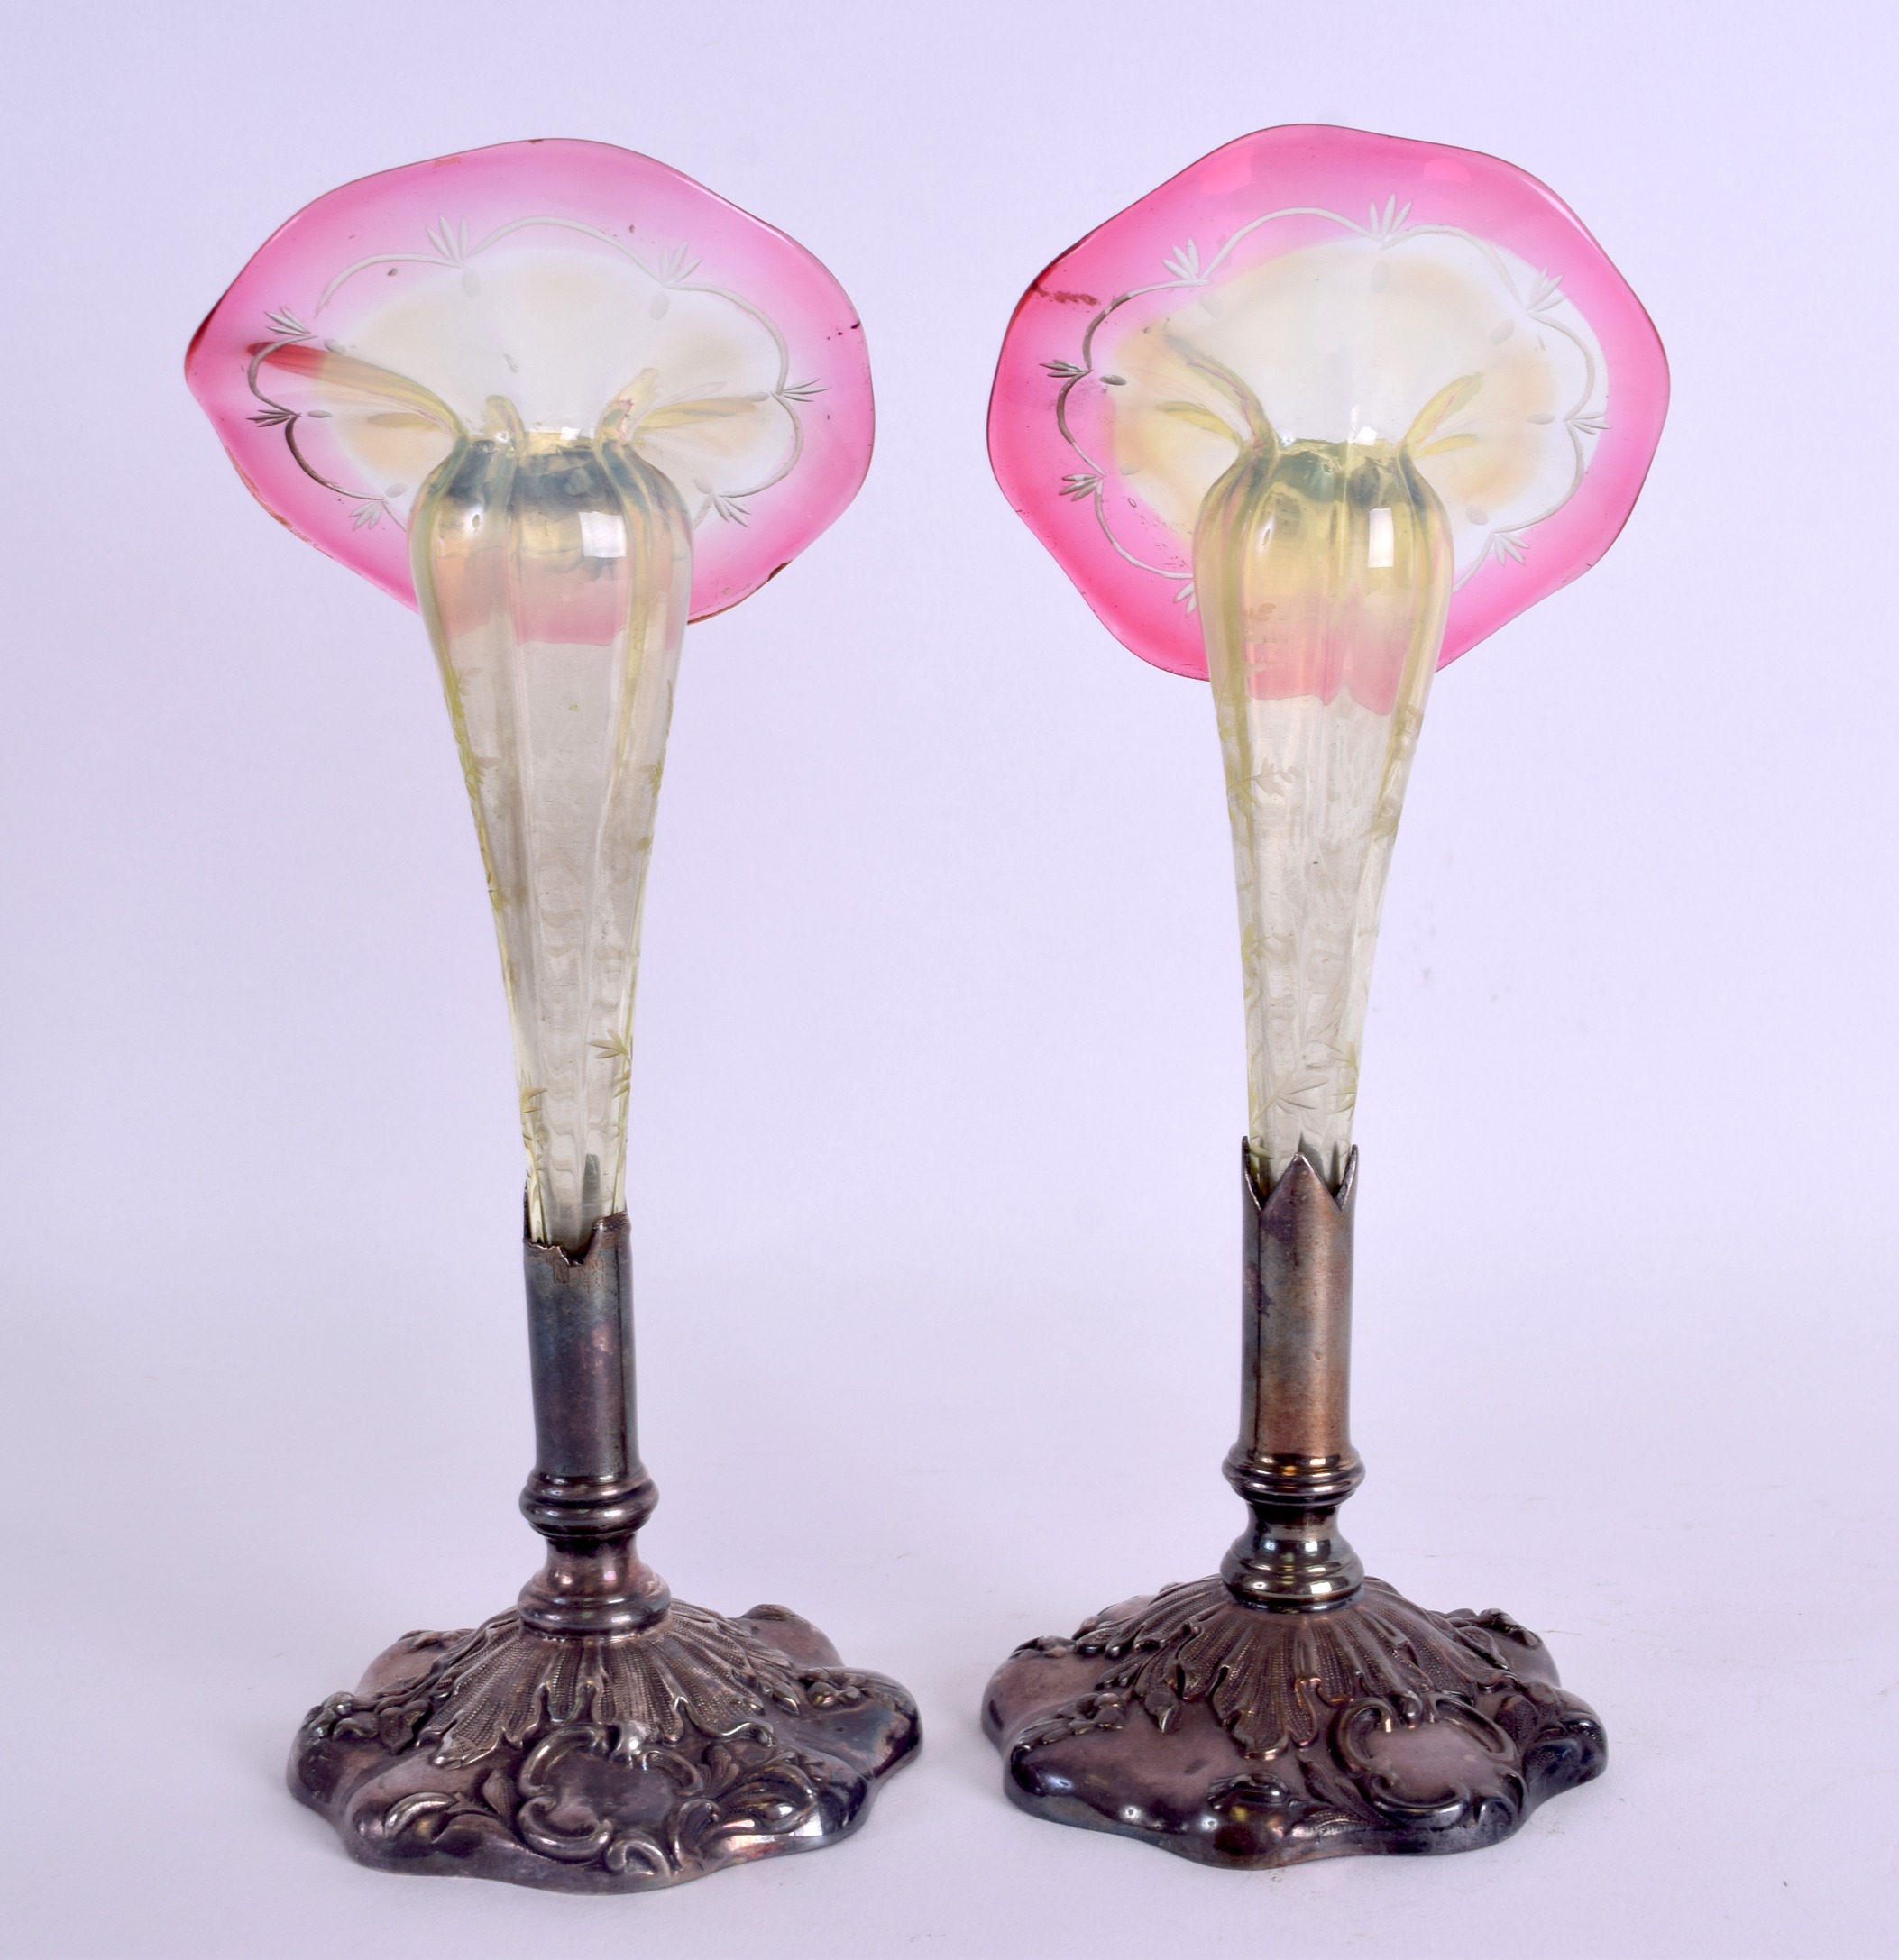 A LOVELY PAIR OF LATE VICTORIAN GLASS POSY VASES in the manner of Webb, set within embossed silver - Image 2 of 4